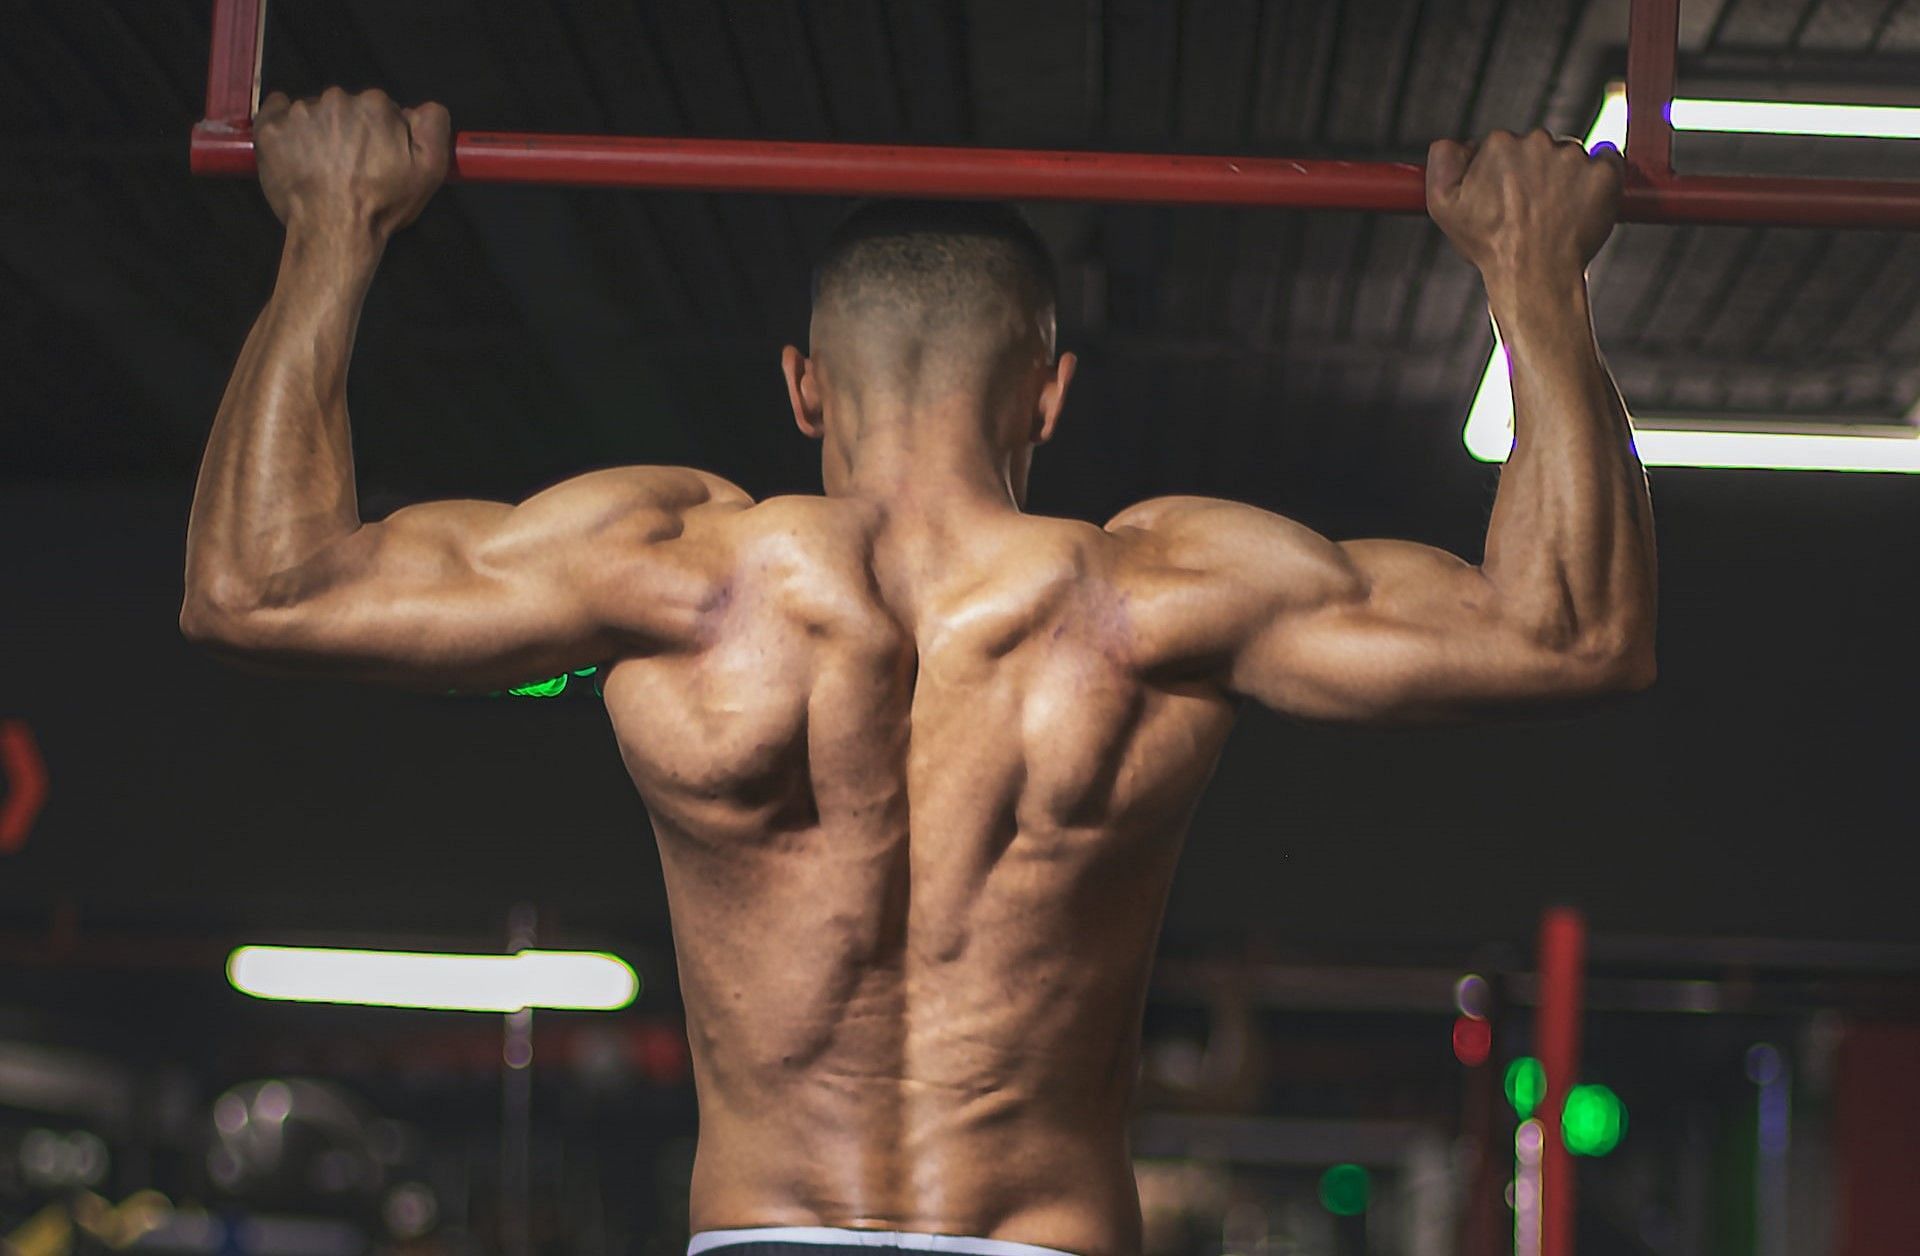 How to build muscle with the proper tips and tricks? (Photo via mob alizadeh/Unsplash)